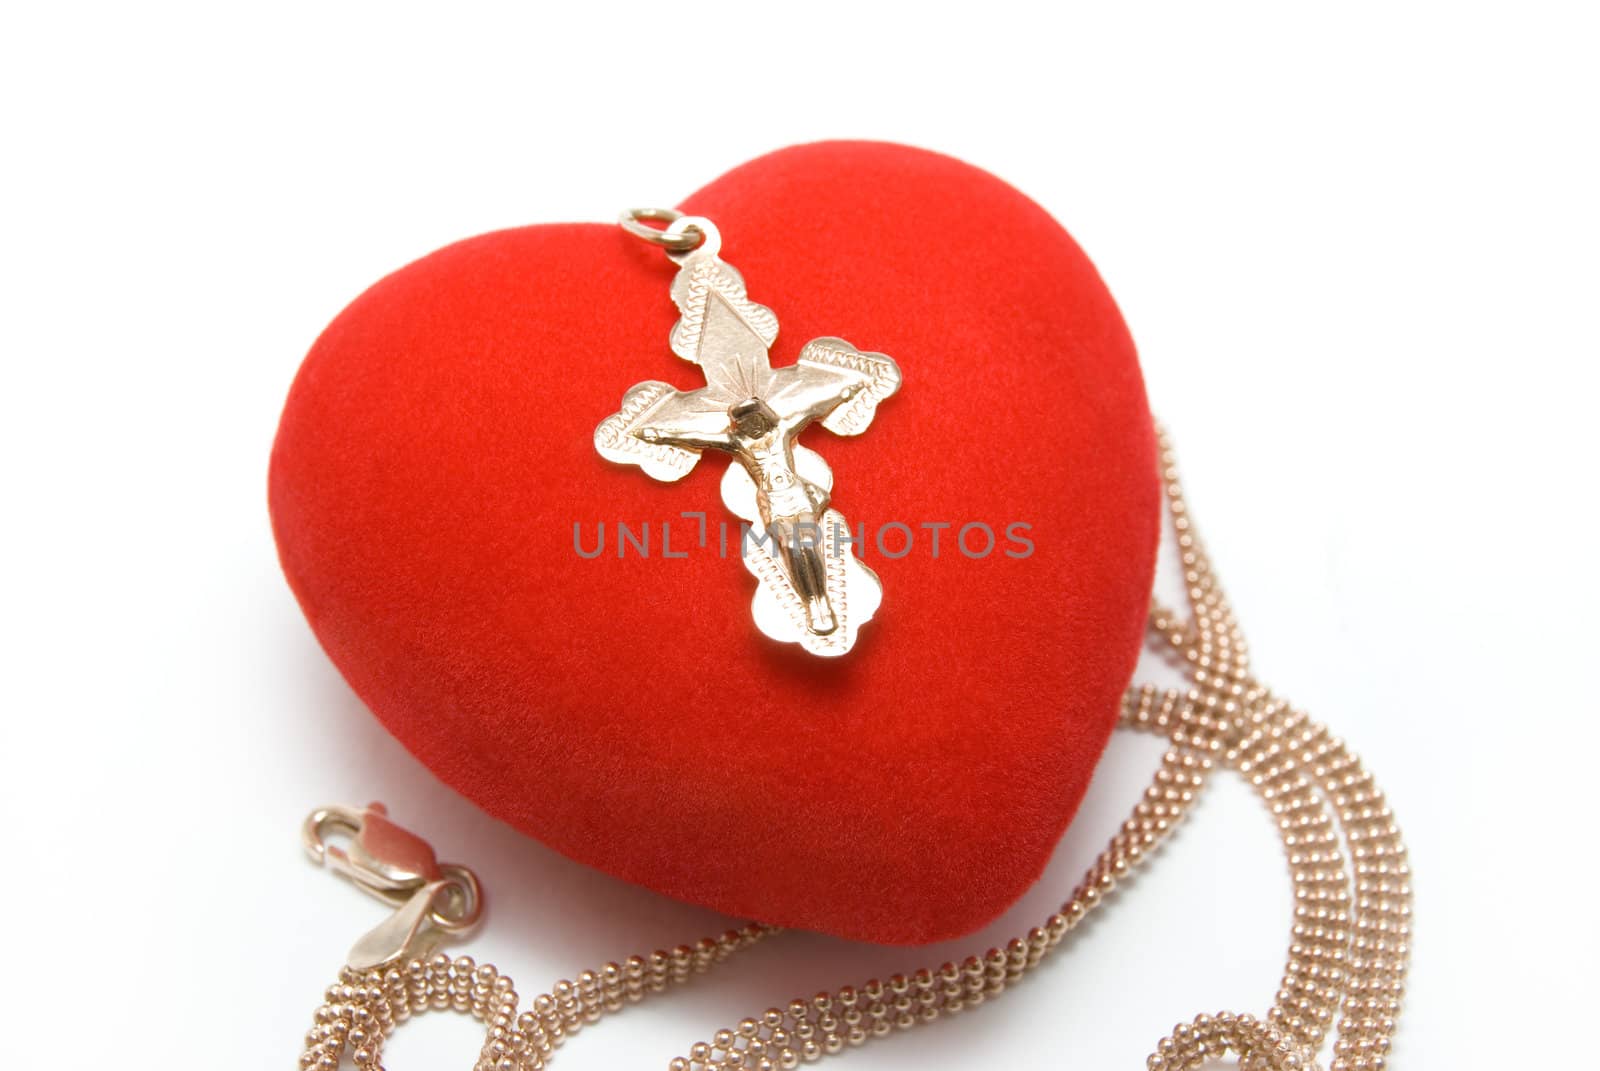 The gold cross with Jesus Christ's image lays on red velvet heart

